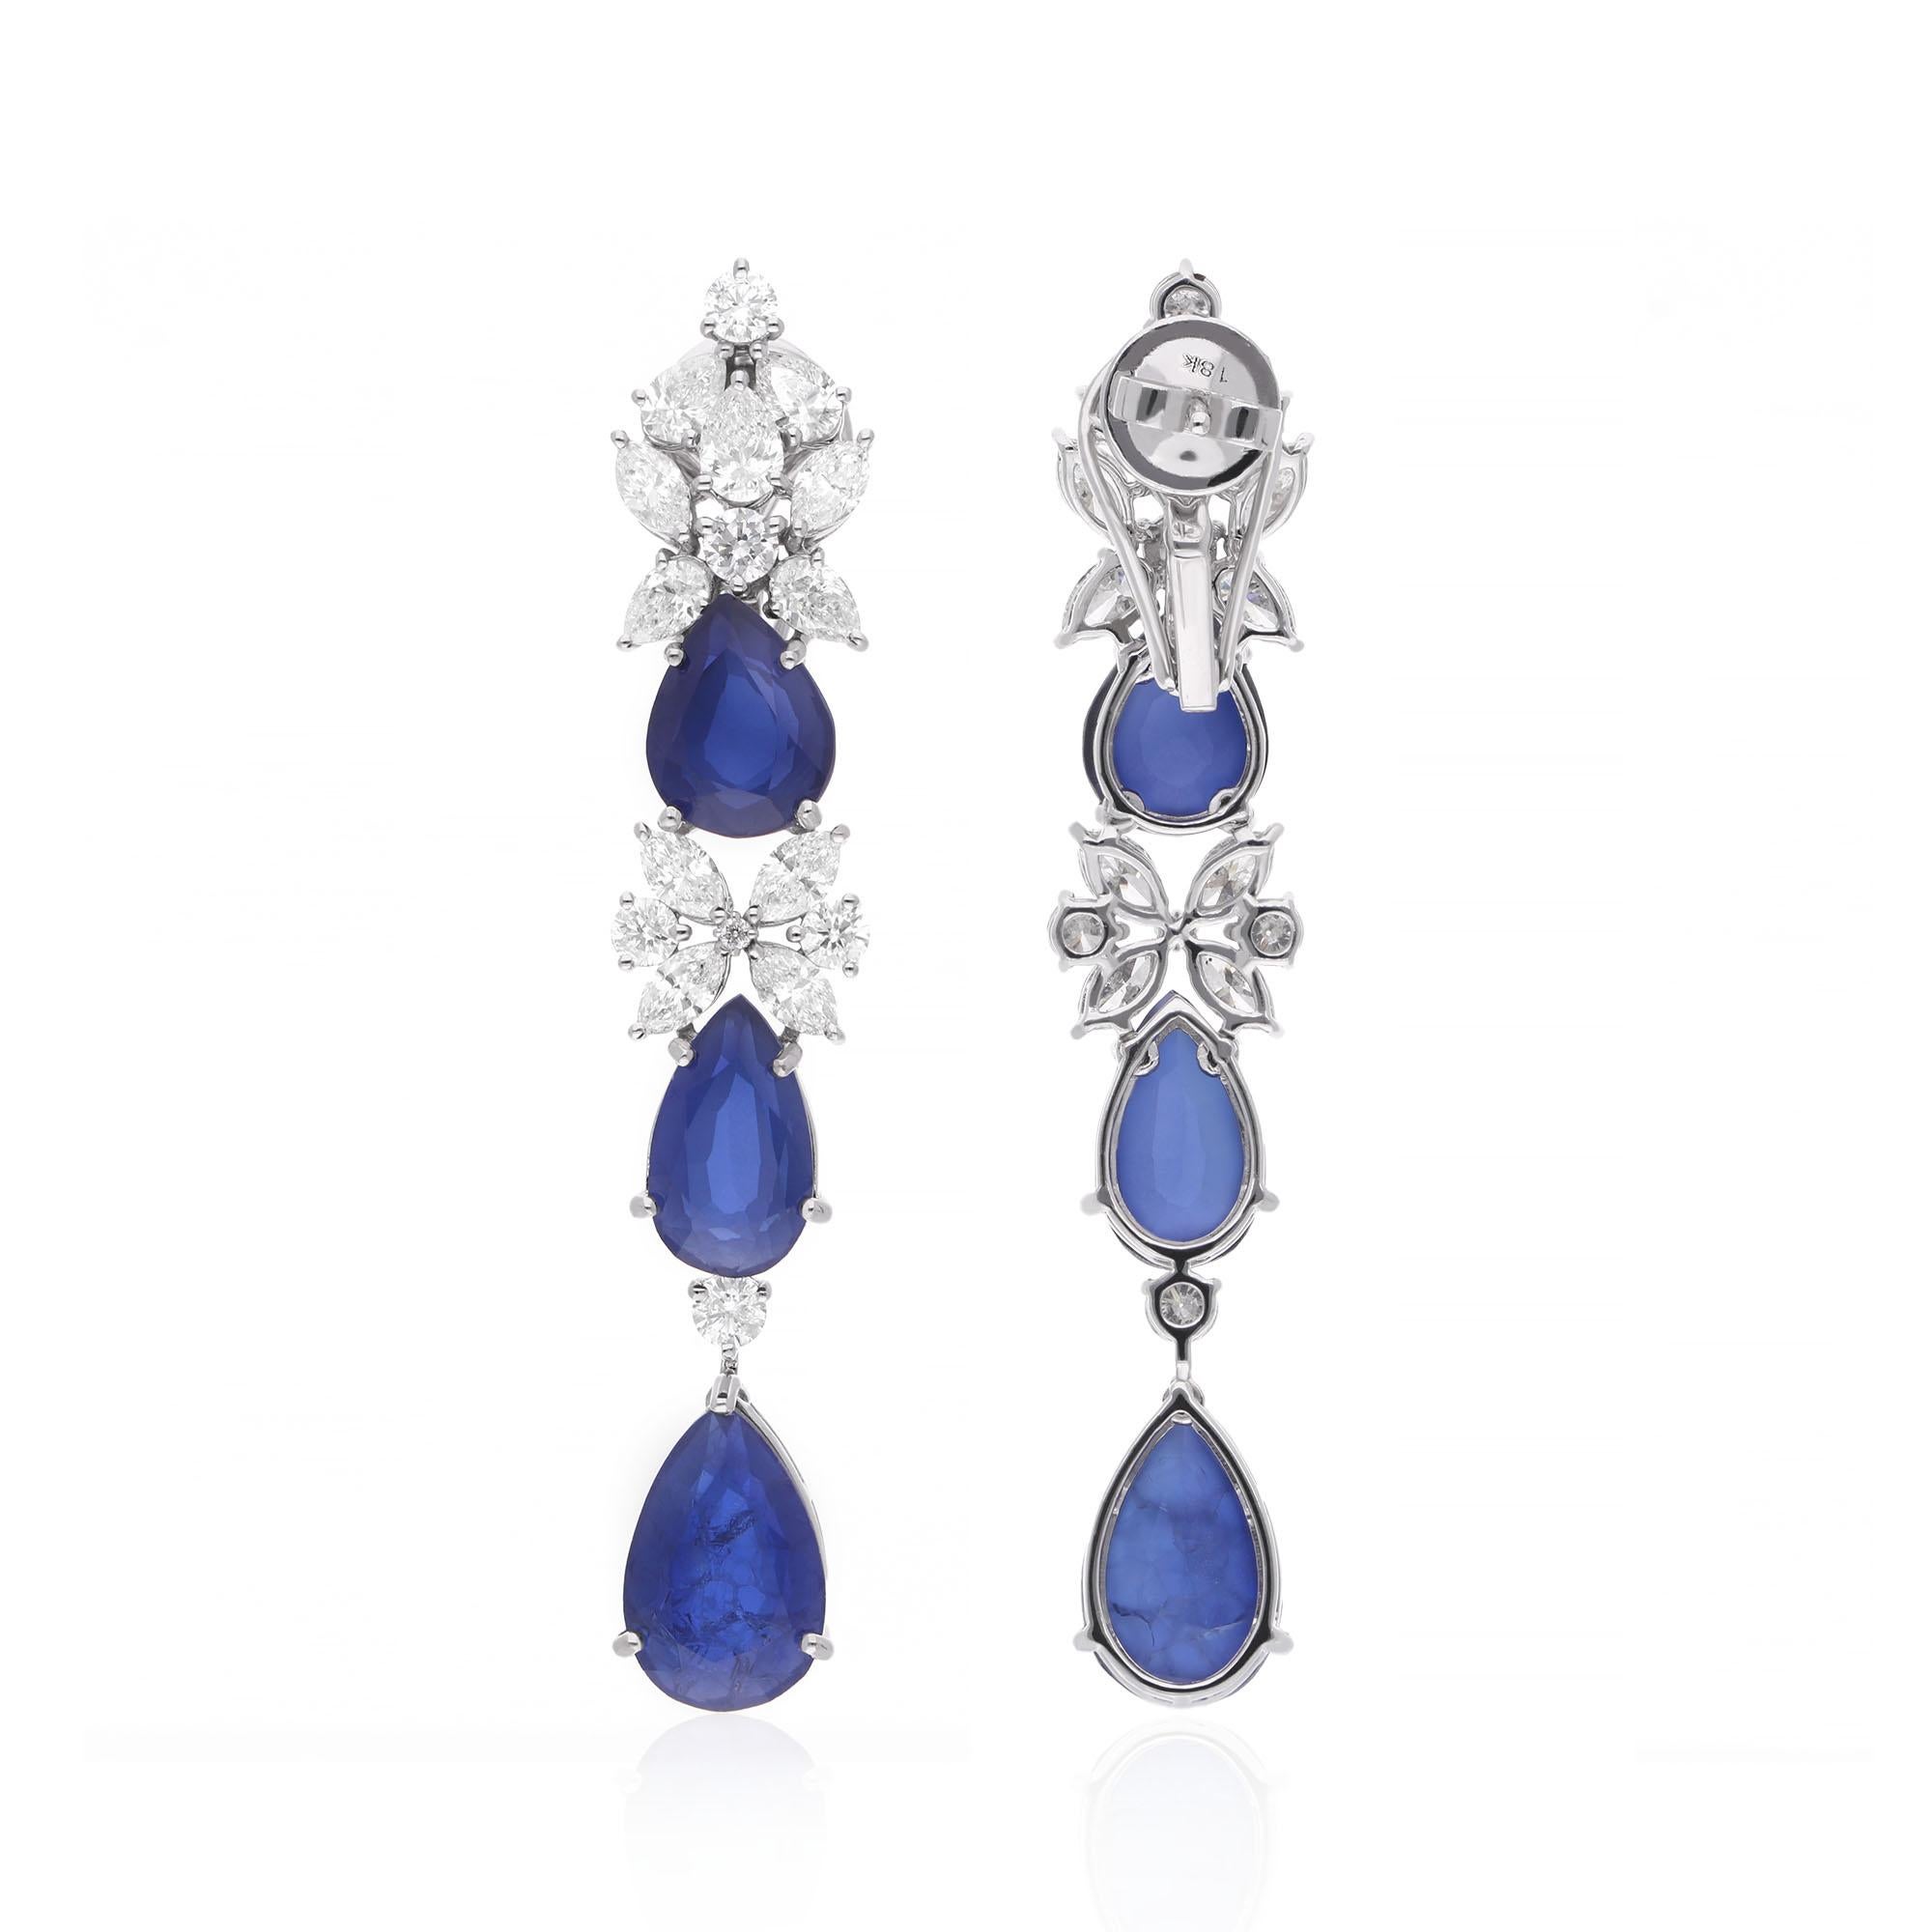 At the heart of each earring is a captivating pear-shaped processed gemstone, meticulously cut and polished to perfection. The processed gemstone exudes a mesmerizing brilliance and depth of color, adding a touch of allure to the design.

Item Code